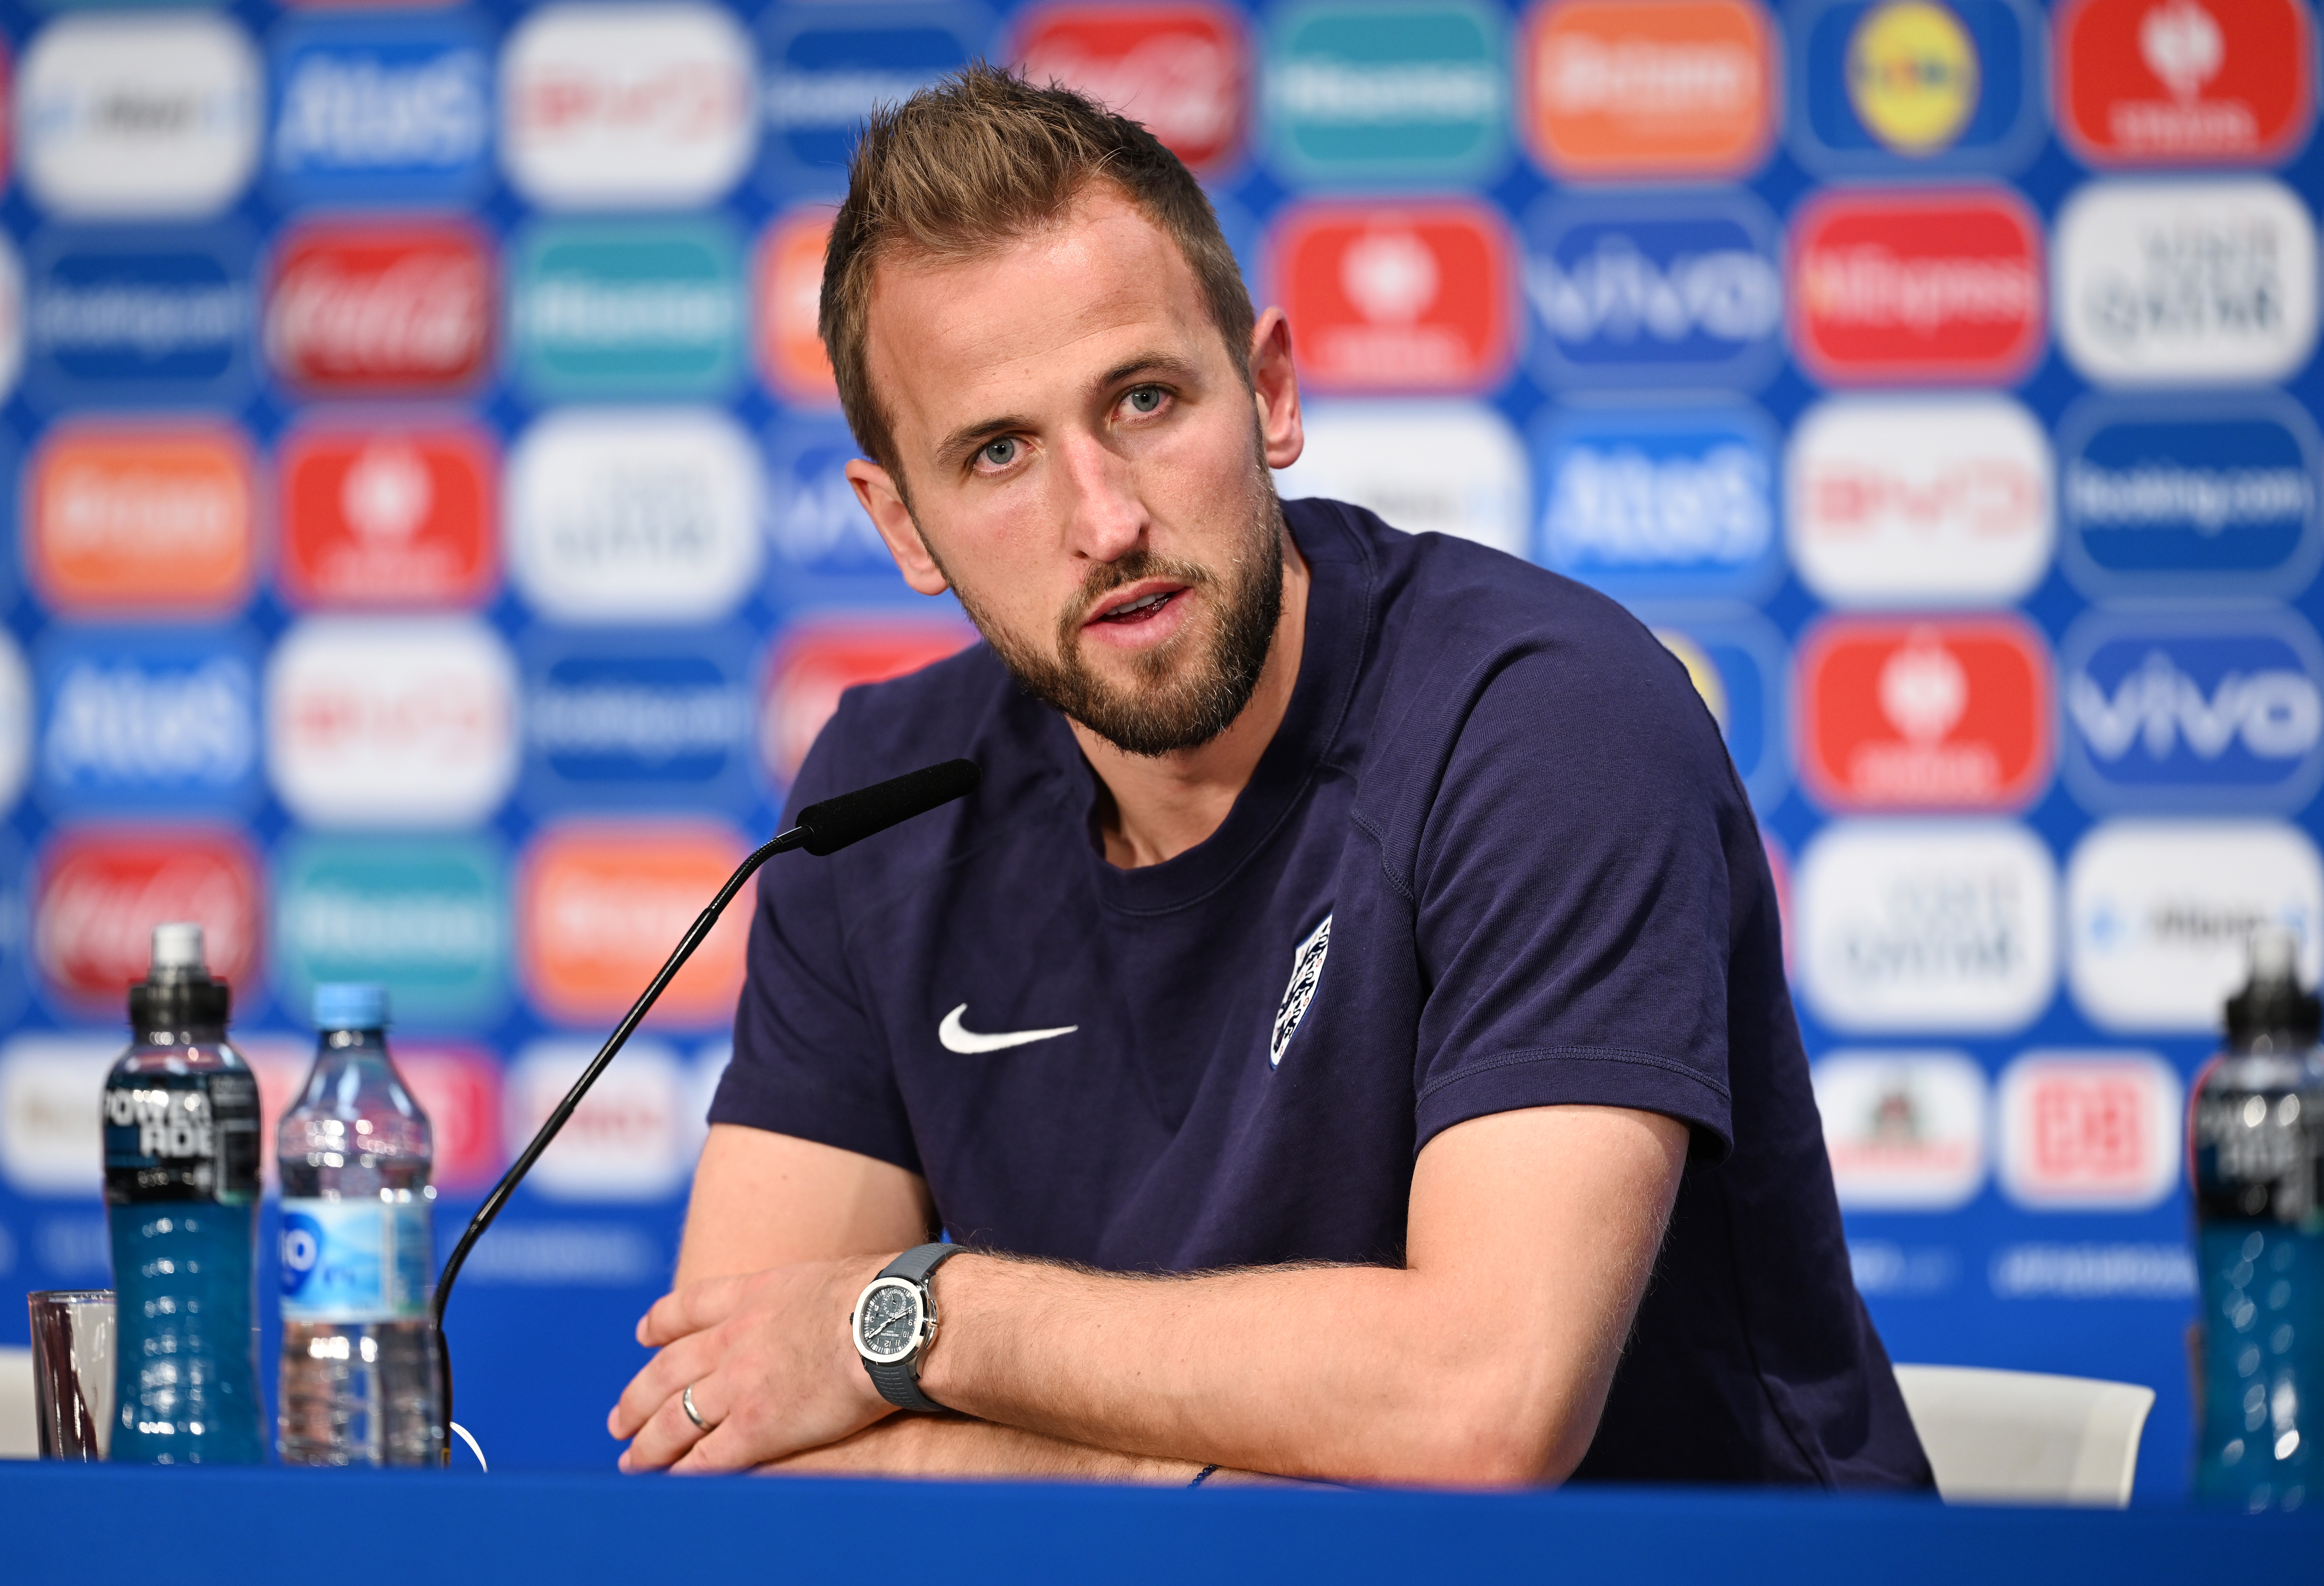 England Training Session And Press Conference: Final - UEFA EURO 2024